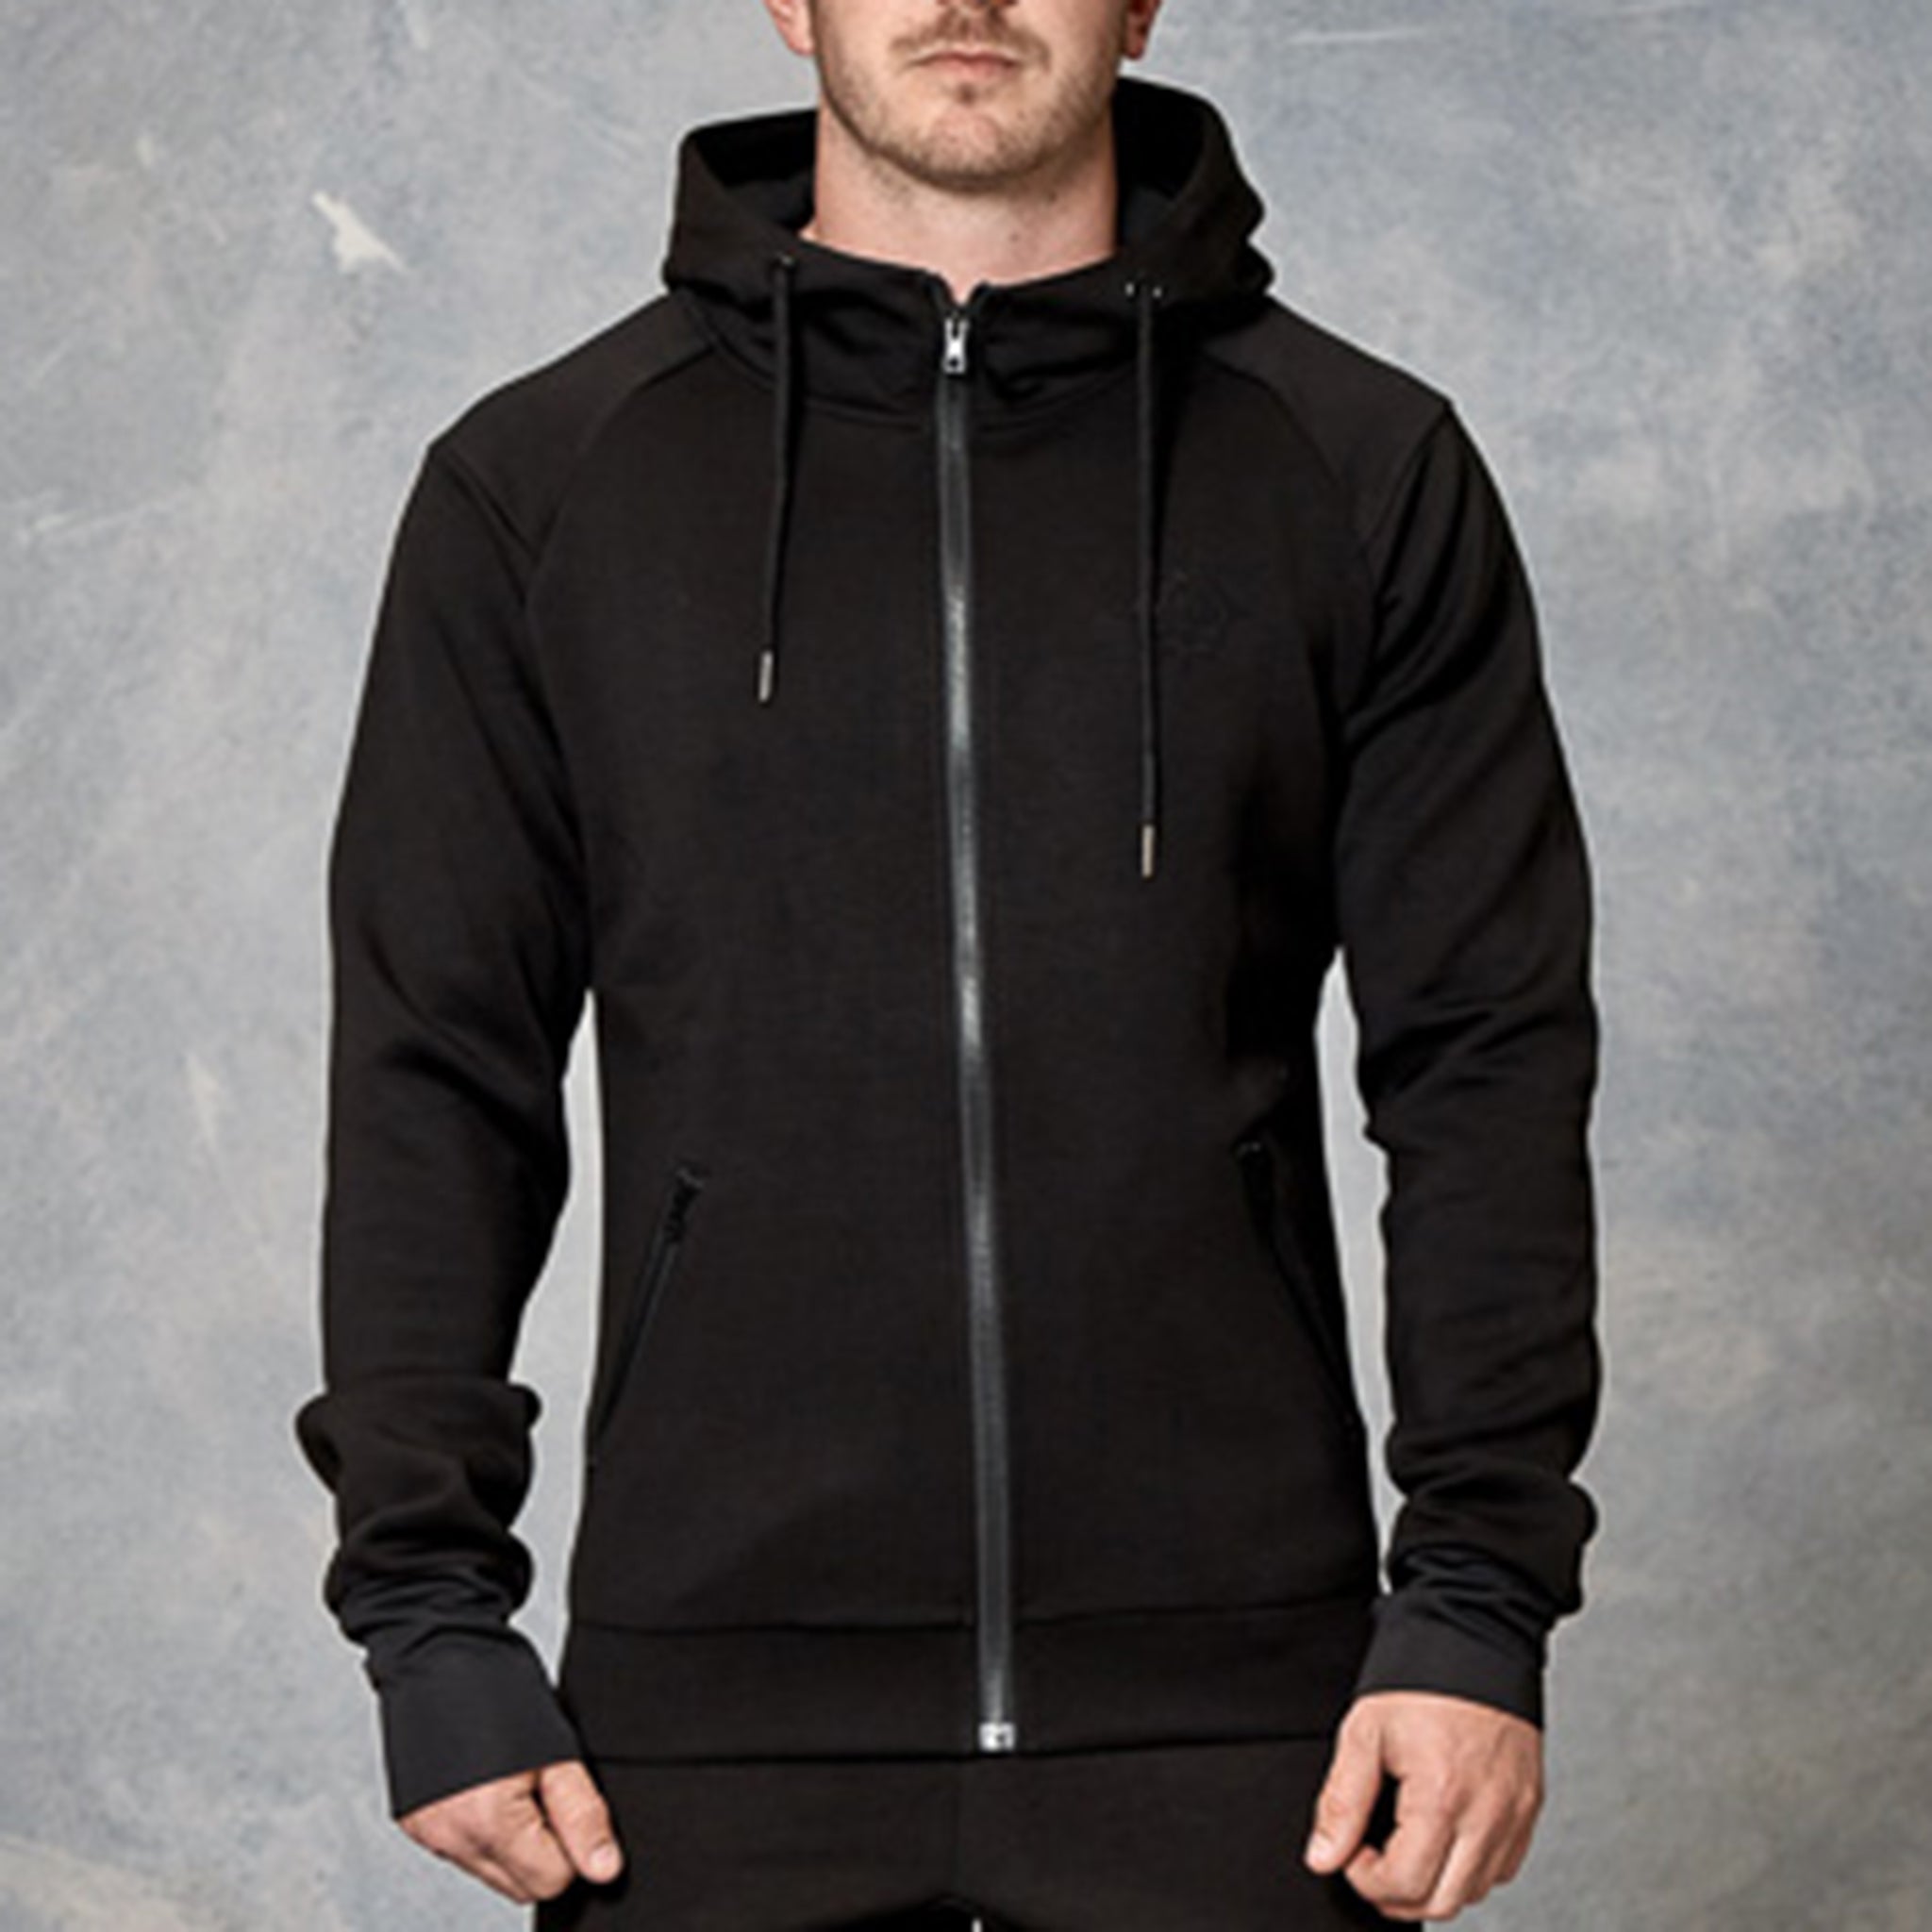 UNFINISHED BUSINESS MEN'S SCUBA NECK HOODIE – Unfinished Business Apparel